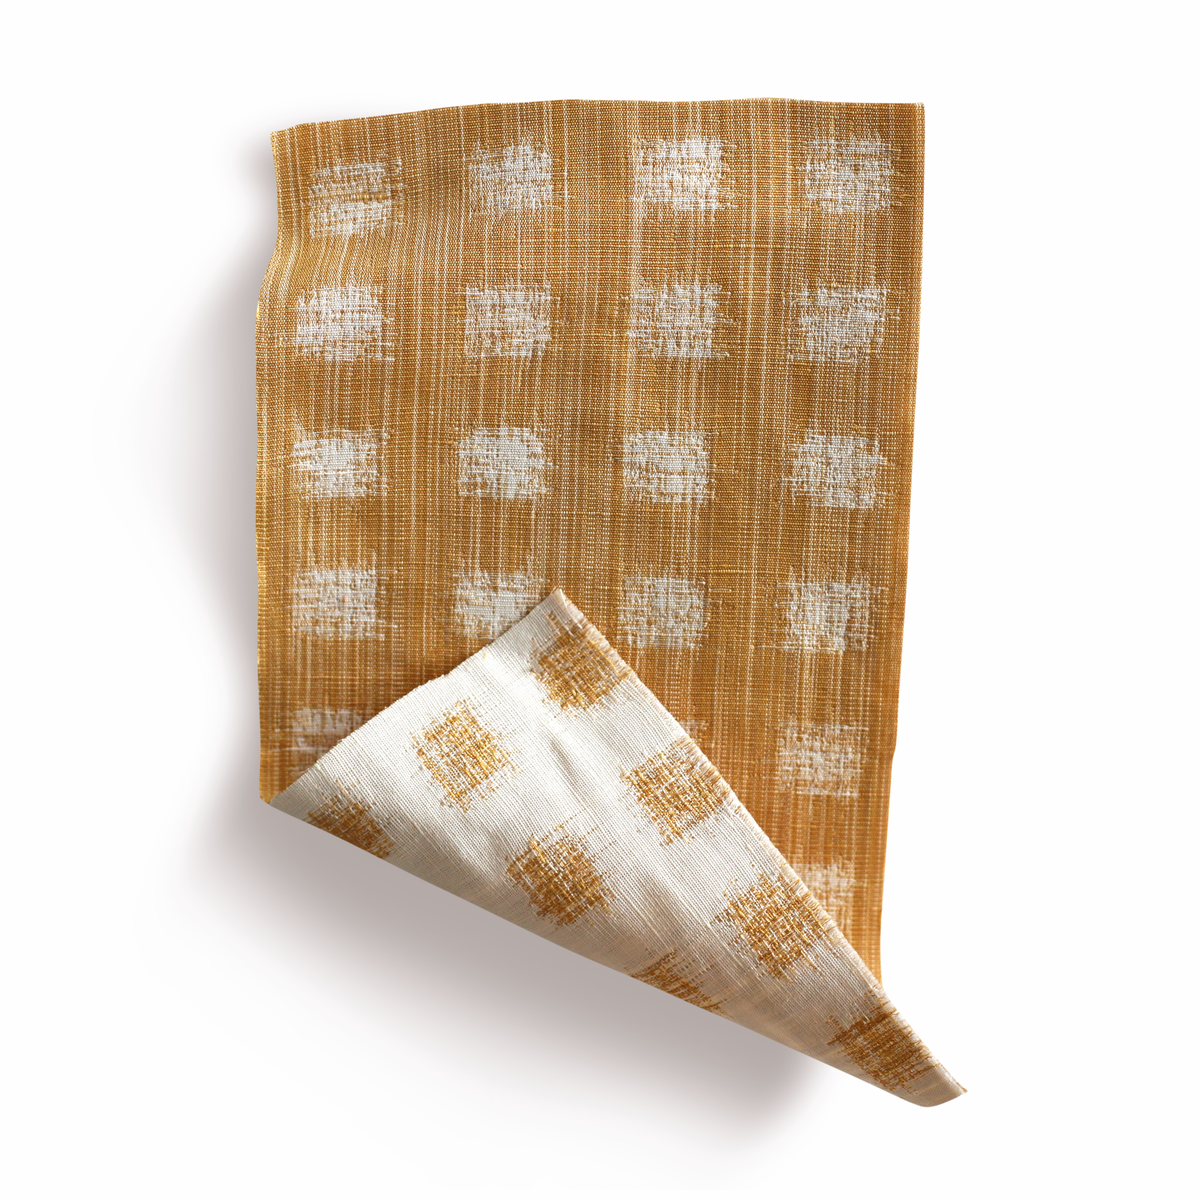 Gridded Ikat Fabric in Goldenrod